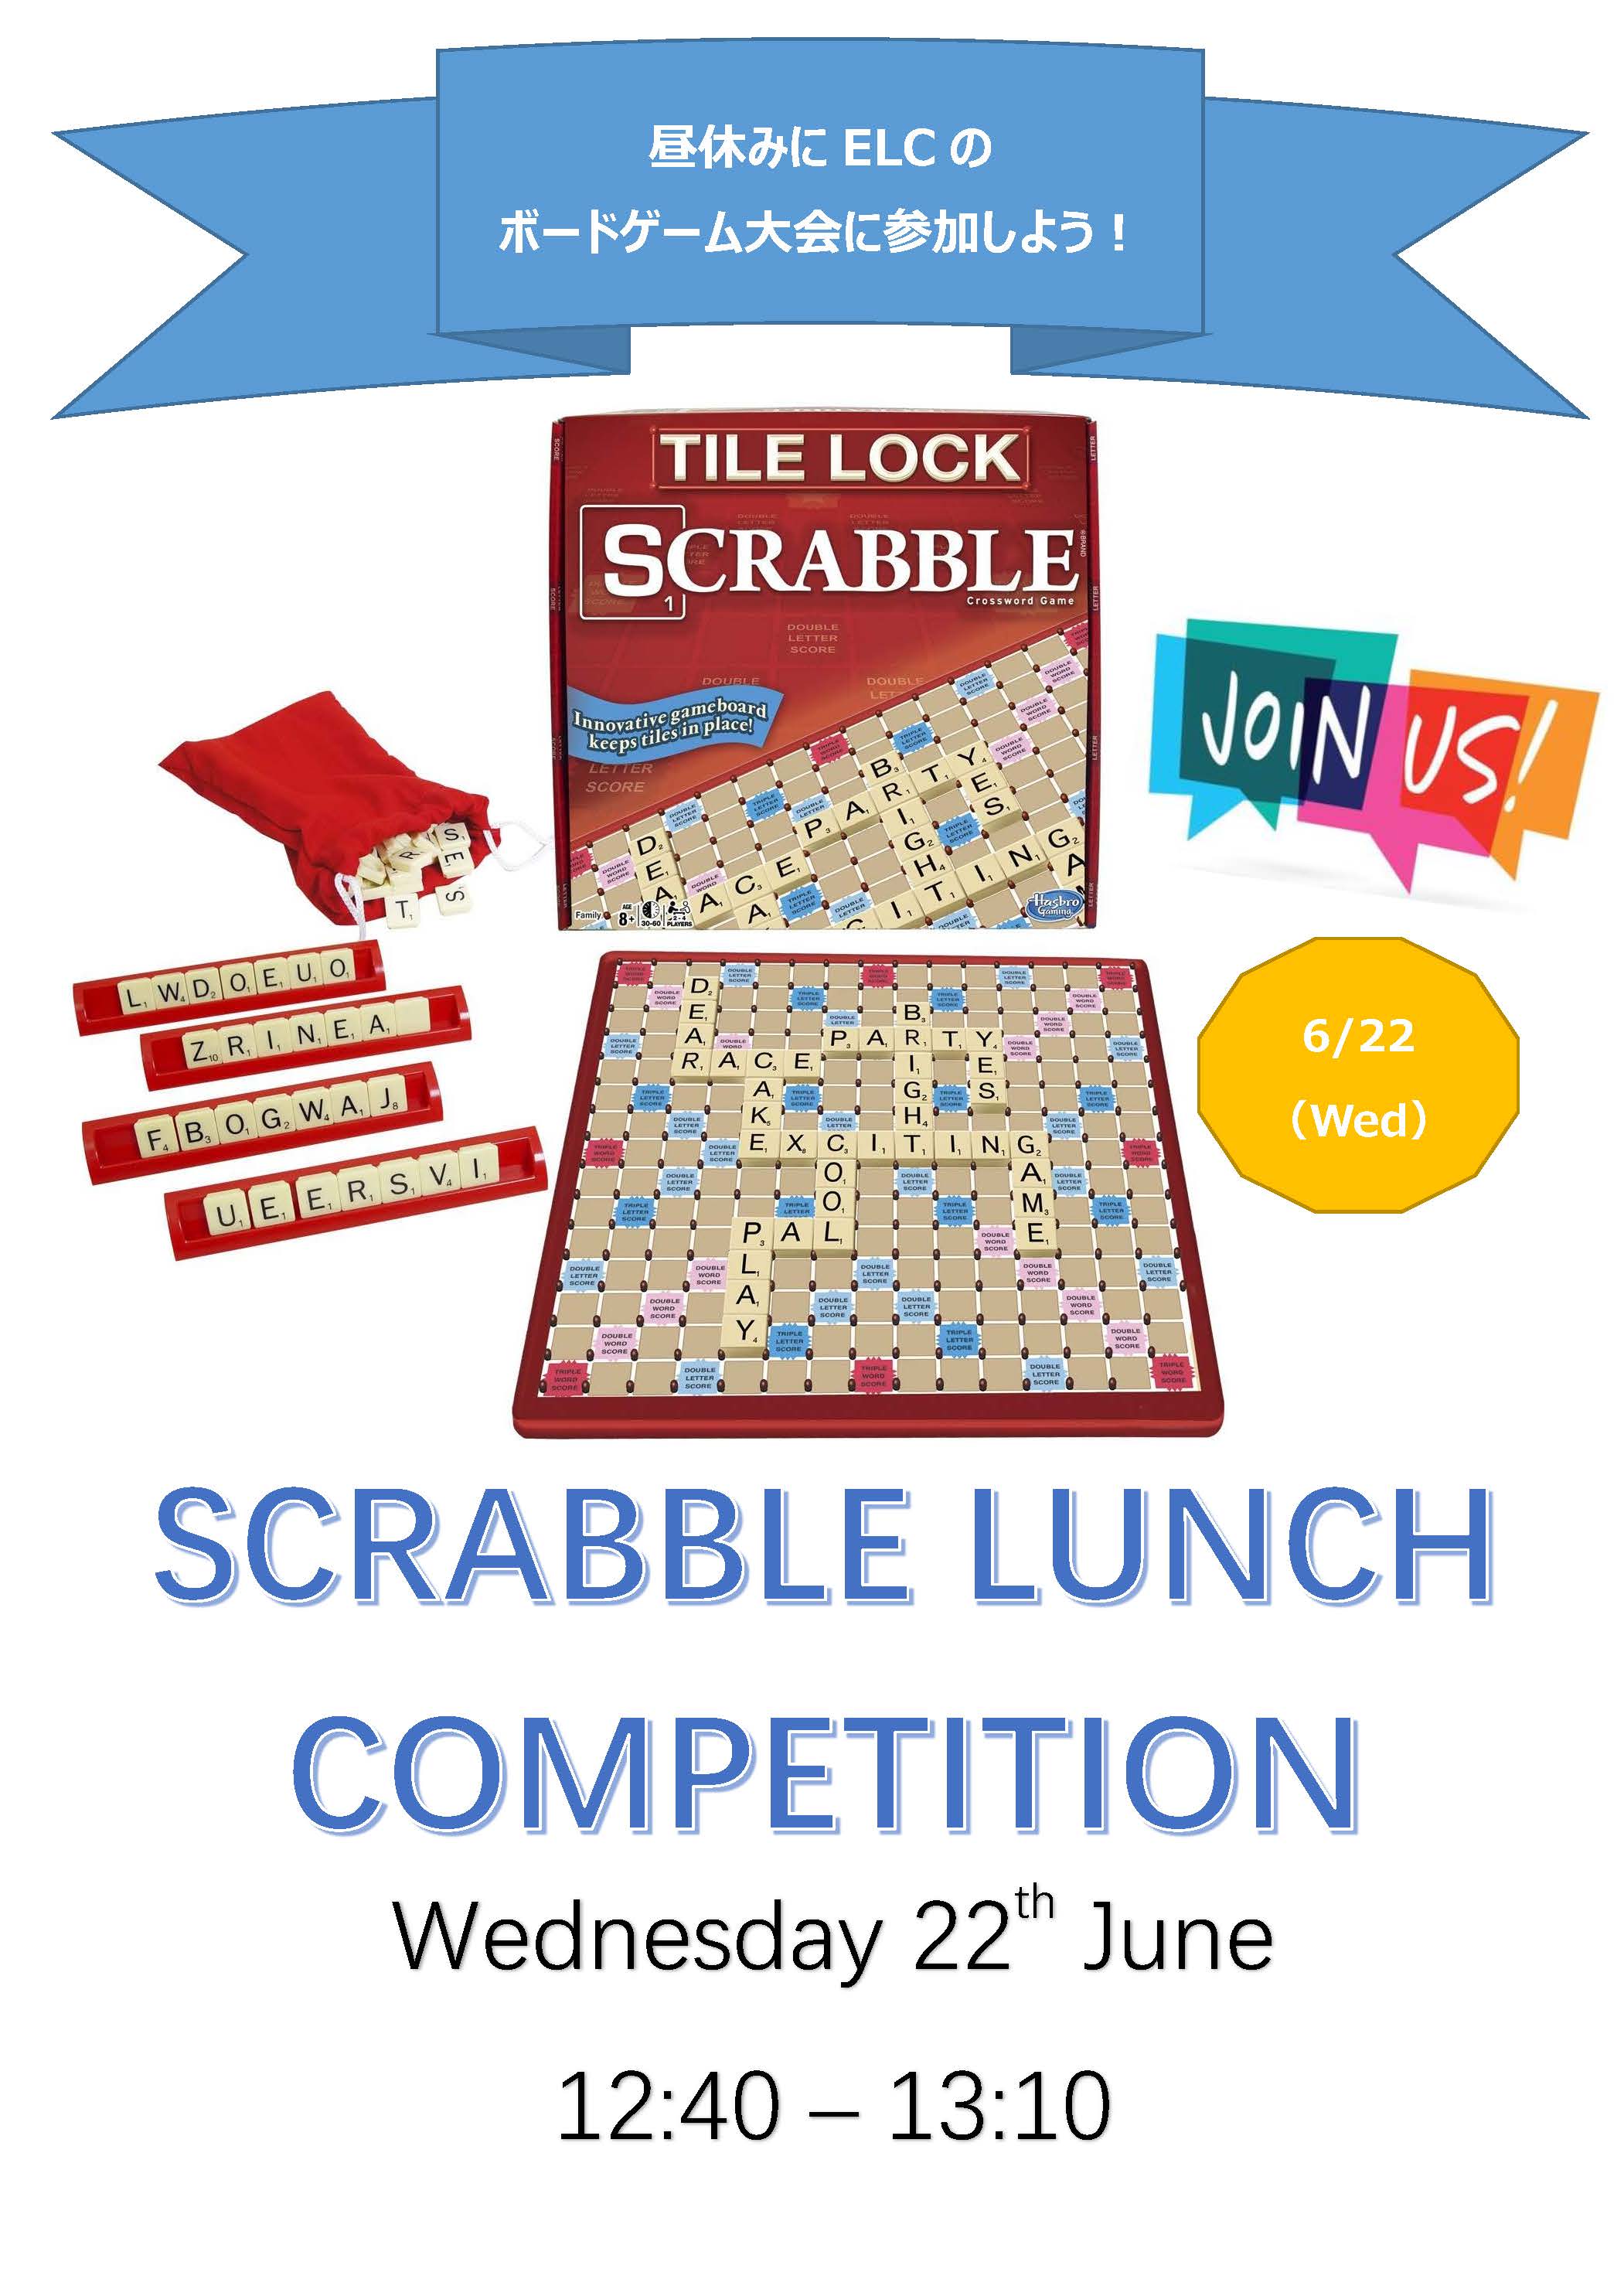 Scrabble Lunch Competition on June 22.